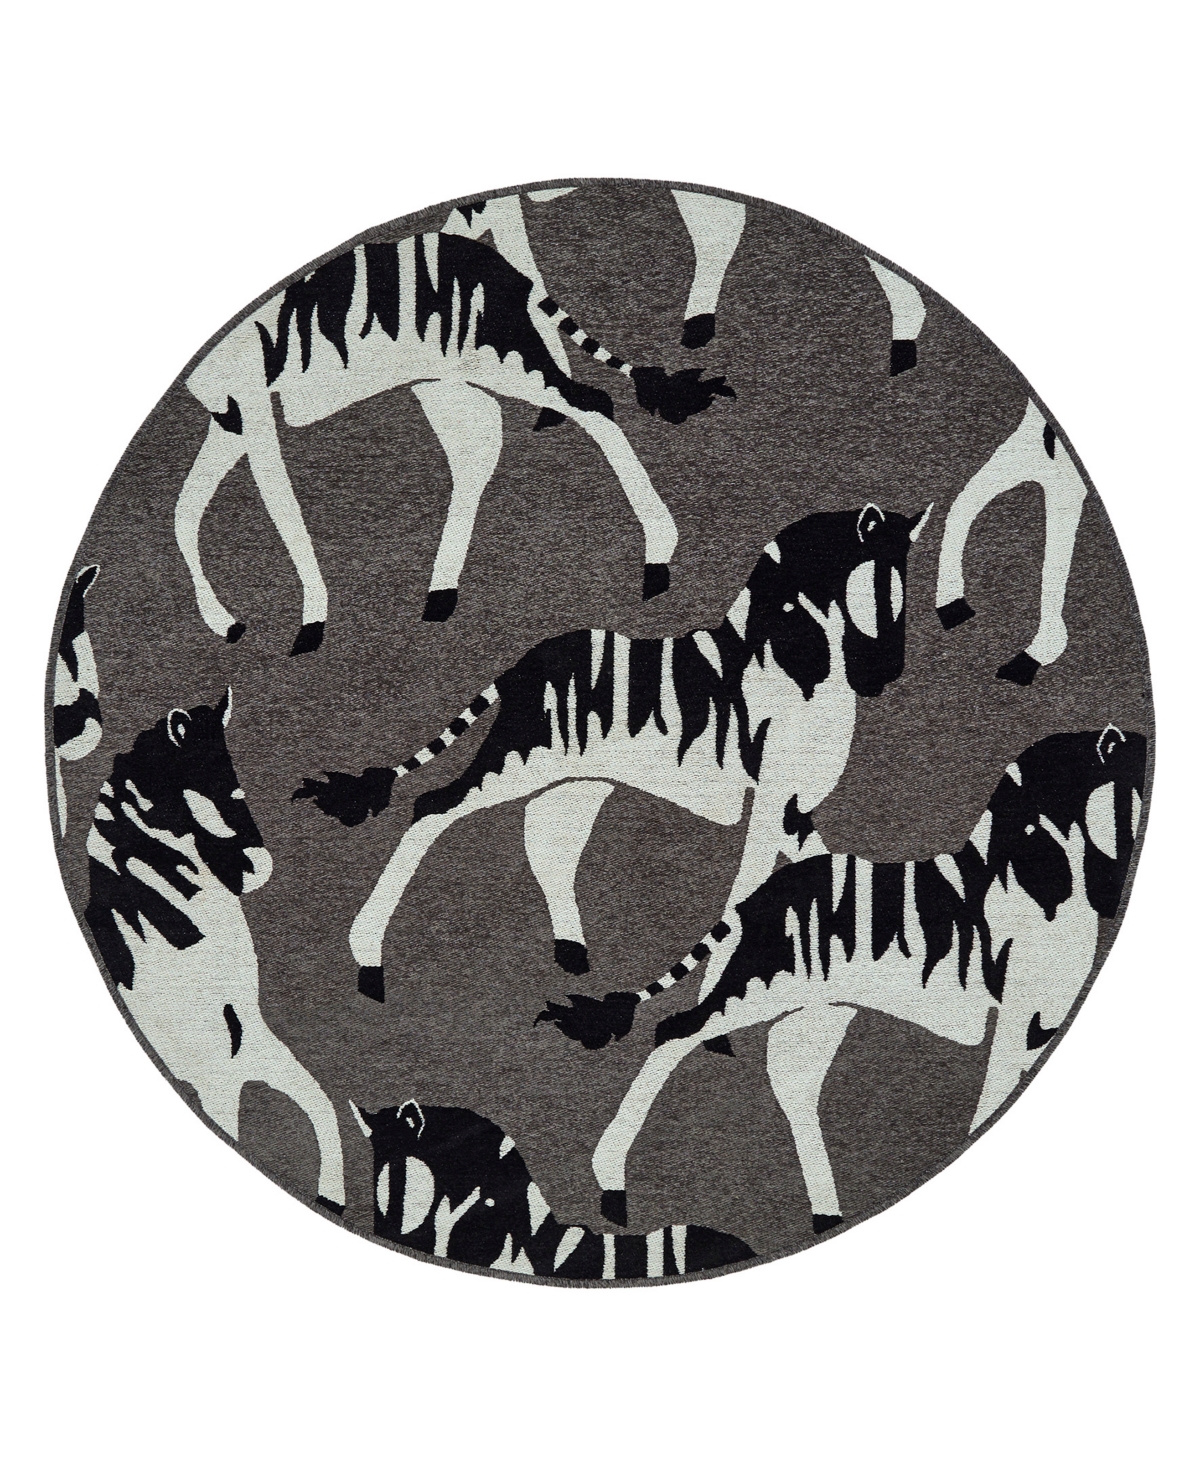 Hilary Farr Forever Fauna Hfa02-38 5' X 5' Round Area Rug In Charcoal